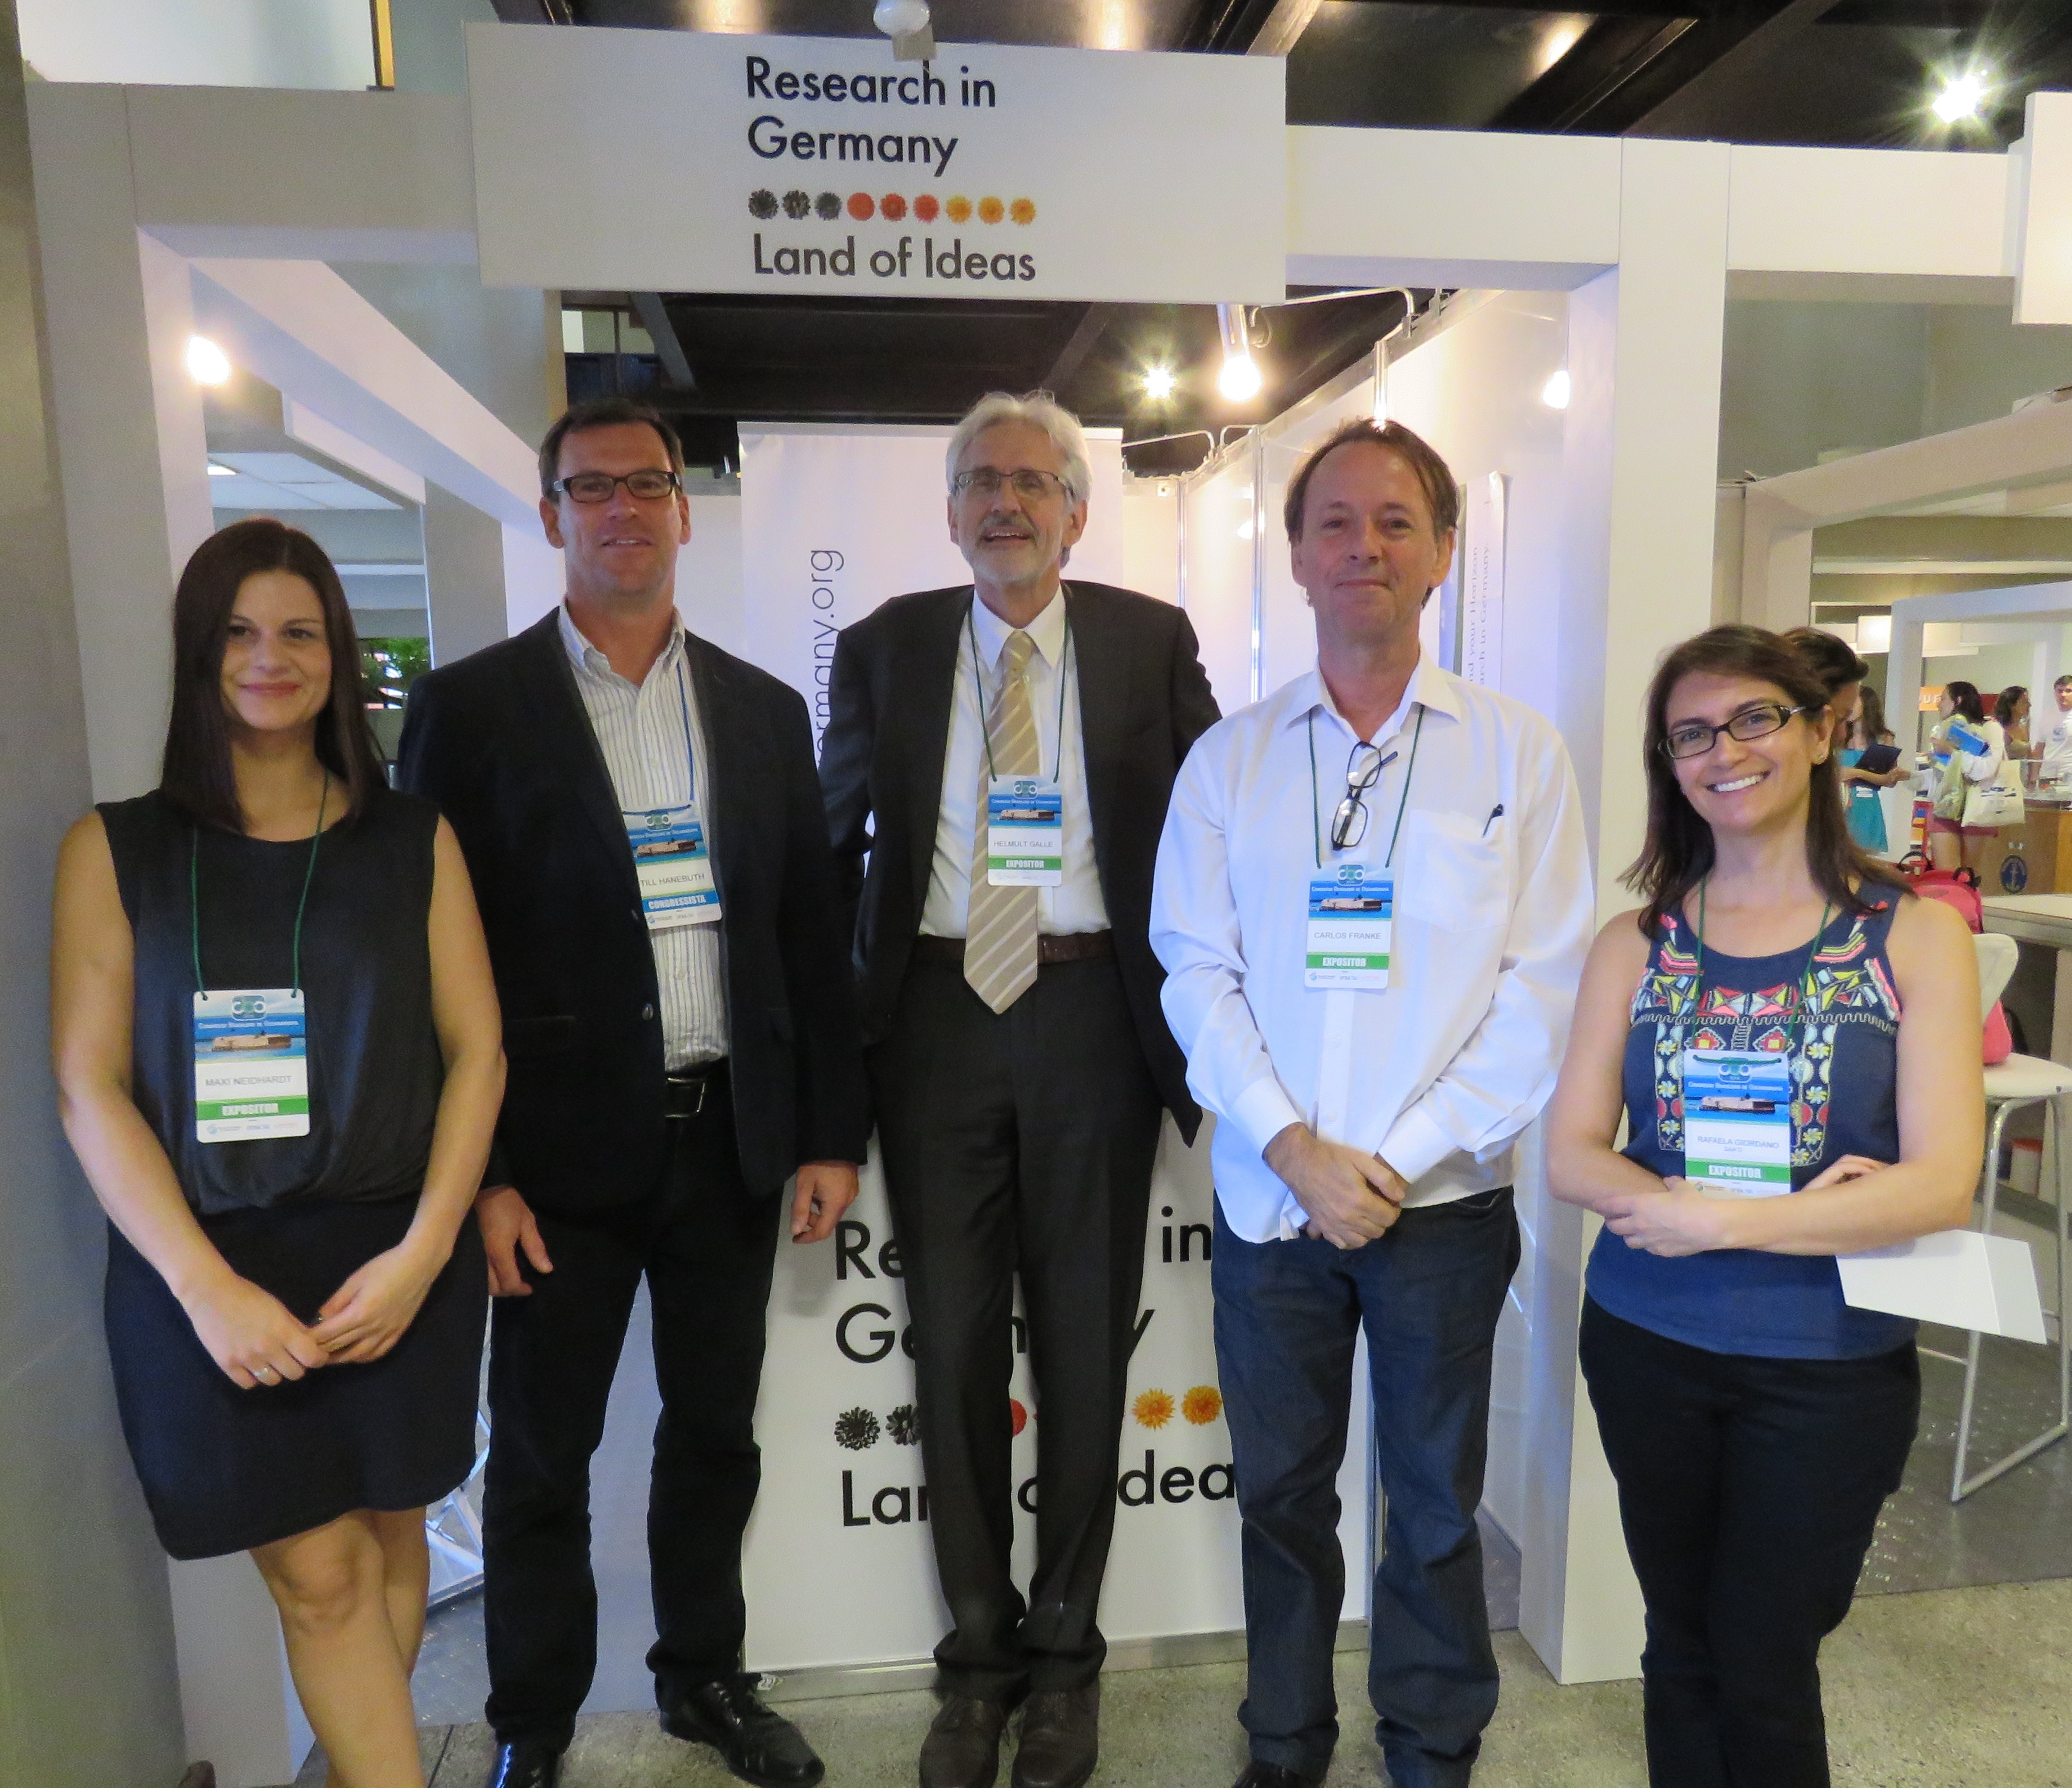 At the Research in Germany stand (left to right): Maxi Neidhardt (DFG), Till Hanebuth (MARUM), Helmut Galle (DFG Liaison Scientist), Carlos Roberto Franke (AvH/UFBA), Rafaela Giordano (DAAD)